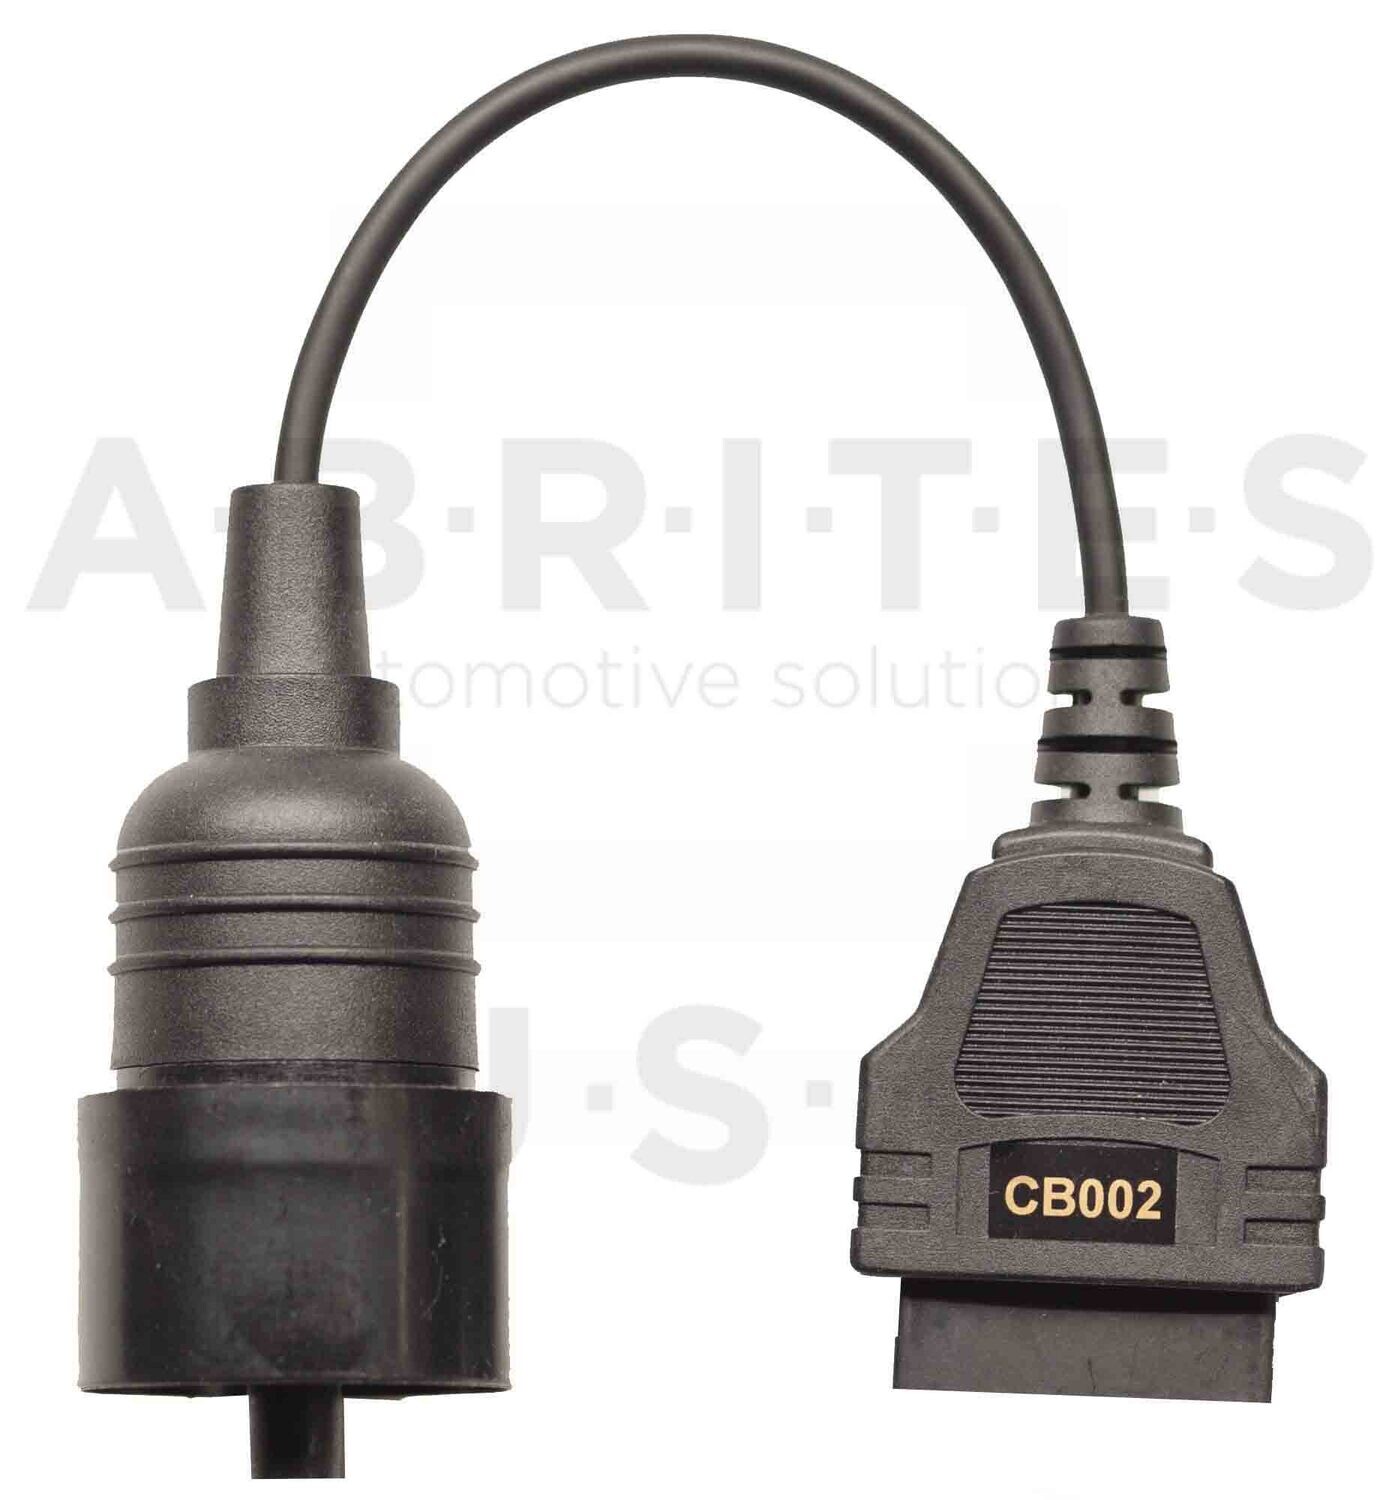 CB002 - AVDI cable for 20 pins round diagnostic connector for BMW